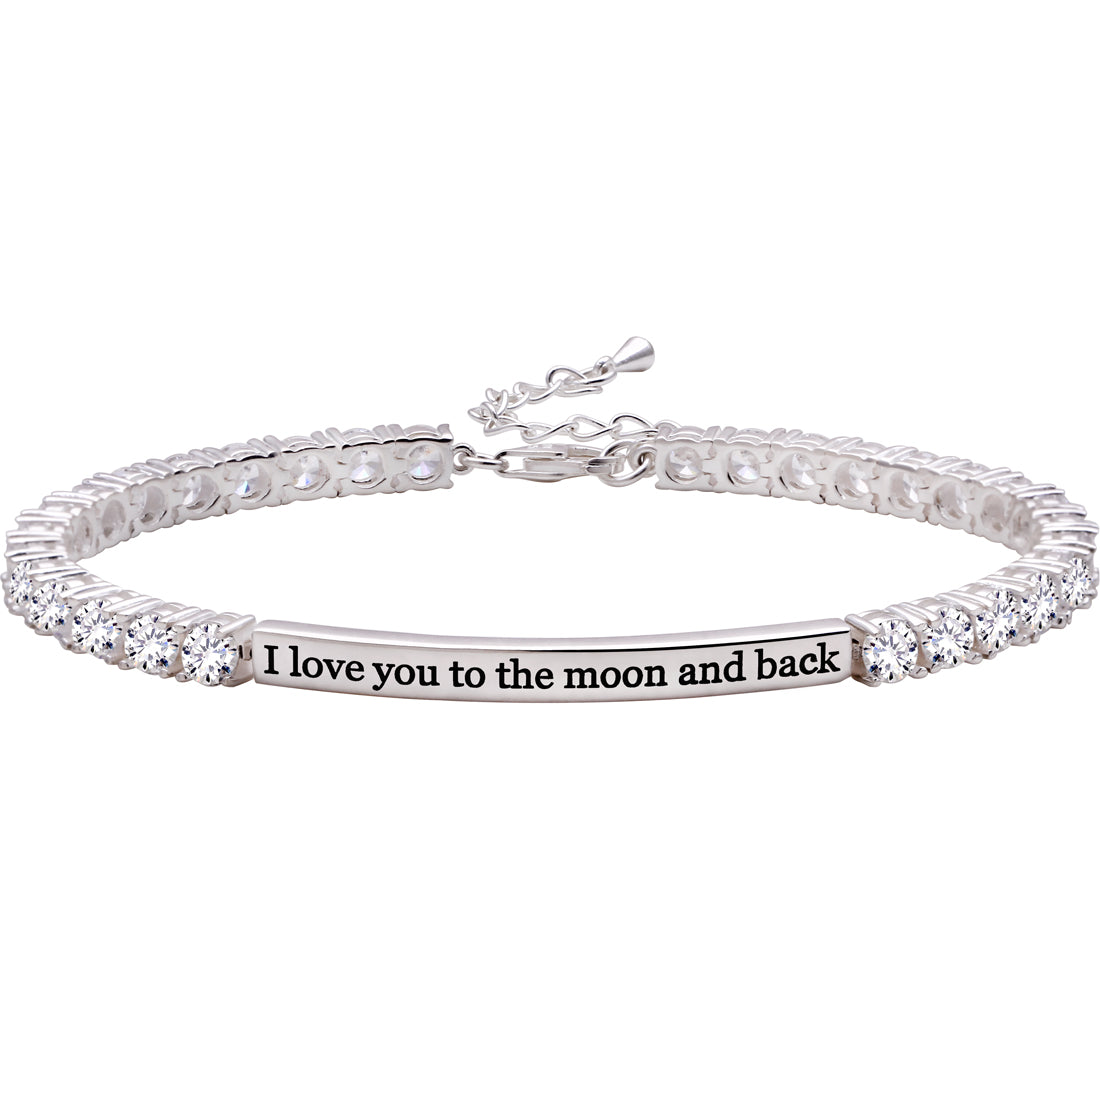 ALOV Jewelry Tennisarmband aus Sterlingsilber mit der Aufschrift „I love you to the moon and back“, 4 mm, Zirkonia